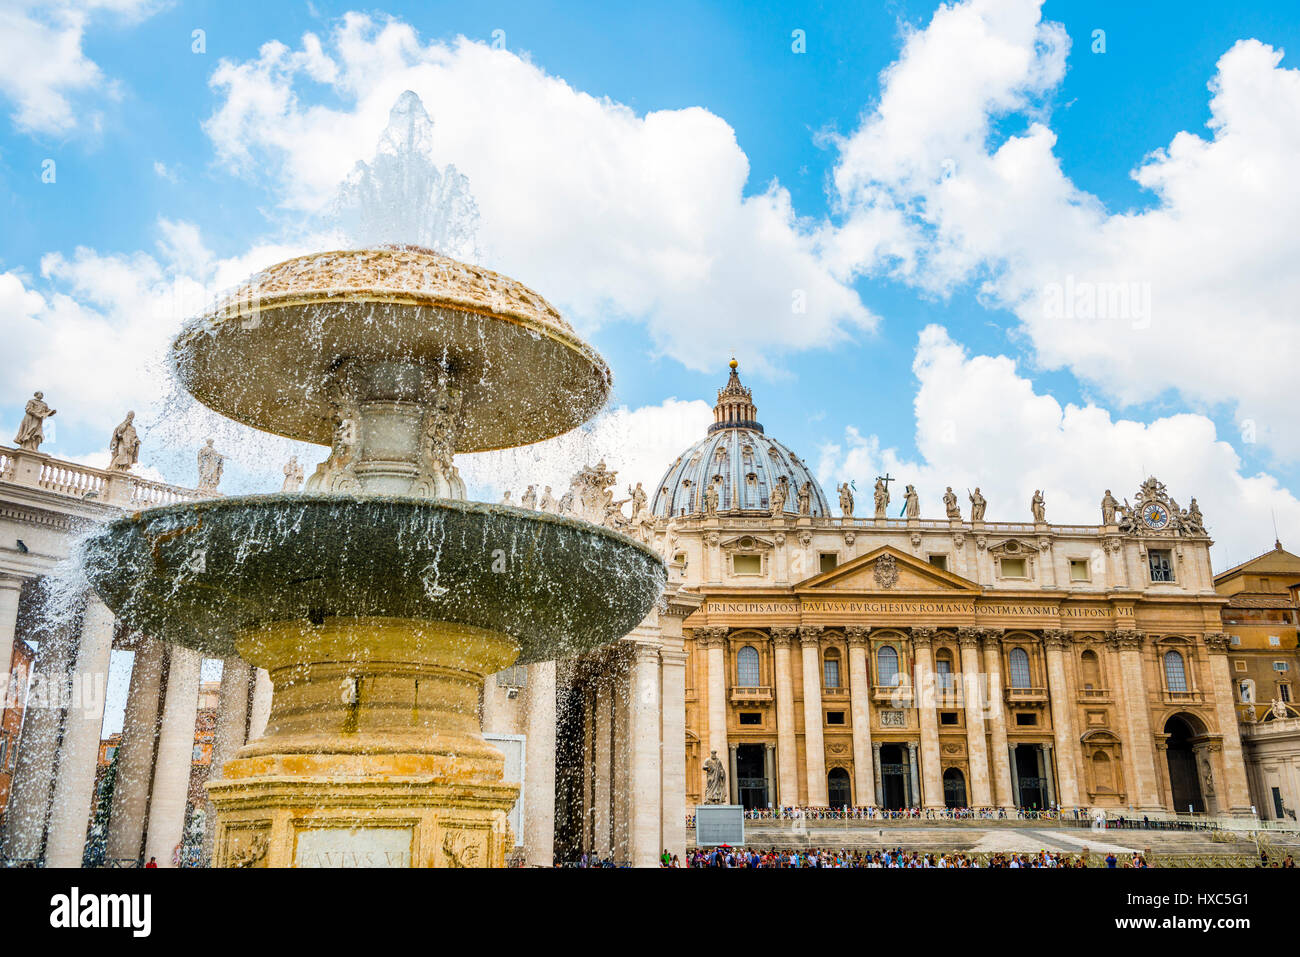 St. Peter's Basilica and fountain, St. Peter's Square, Rome, Lazio, Italy Stock Photo